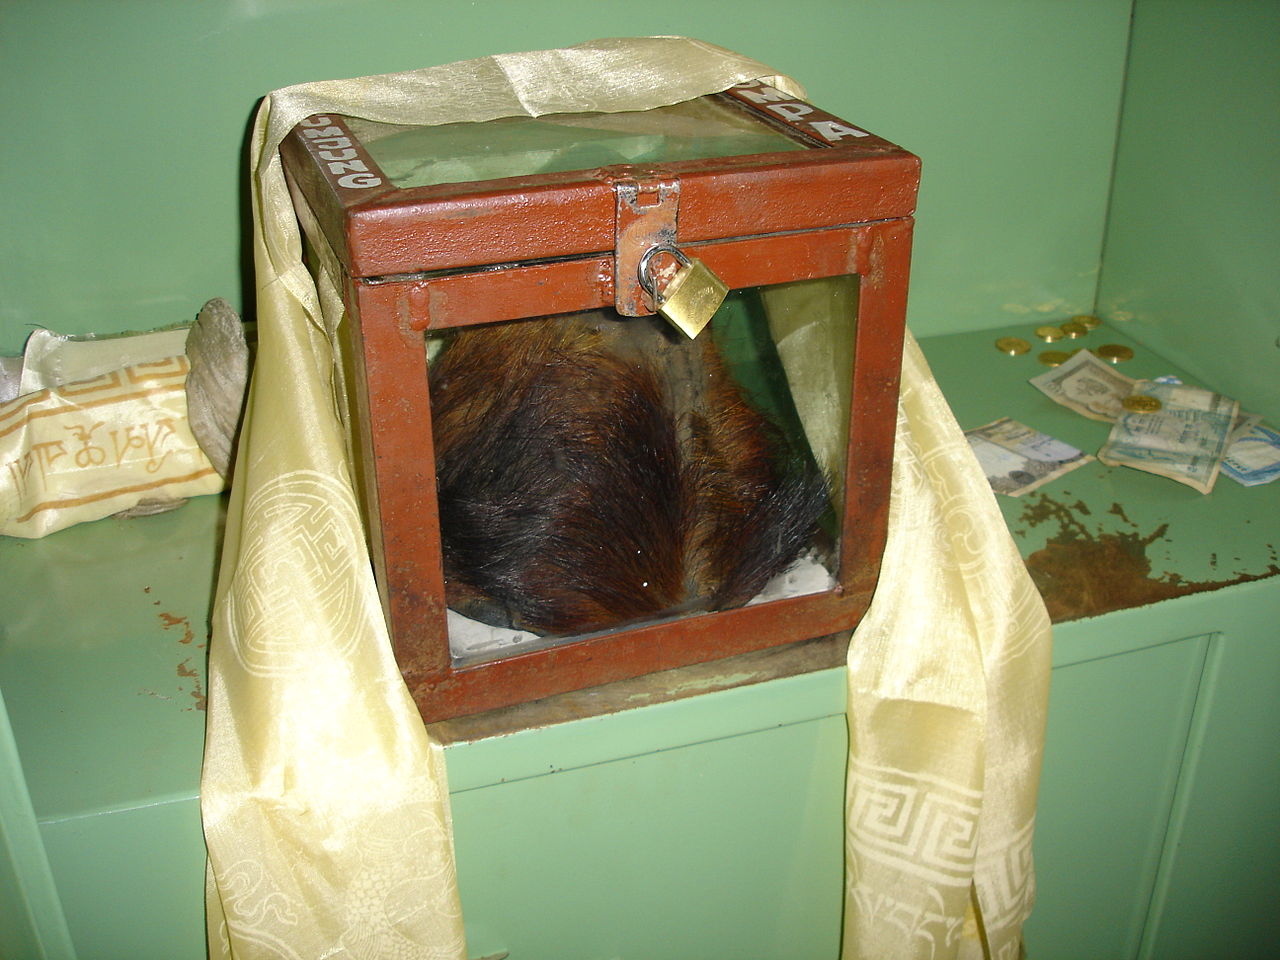  On display at the Khumjung monastery in Nepal is a relic some believed was the scalp of a Yeti.&nbsp; However, it seems DNA testing has shown the scalp is actually the rump hide from a goat. 